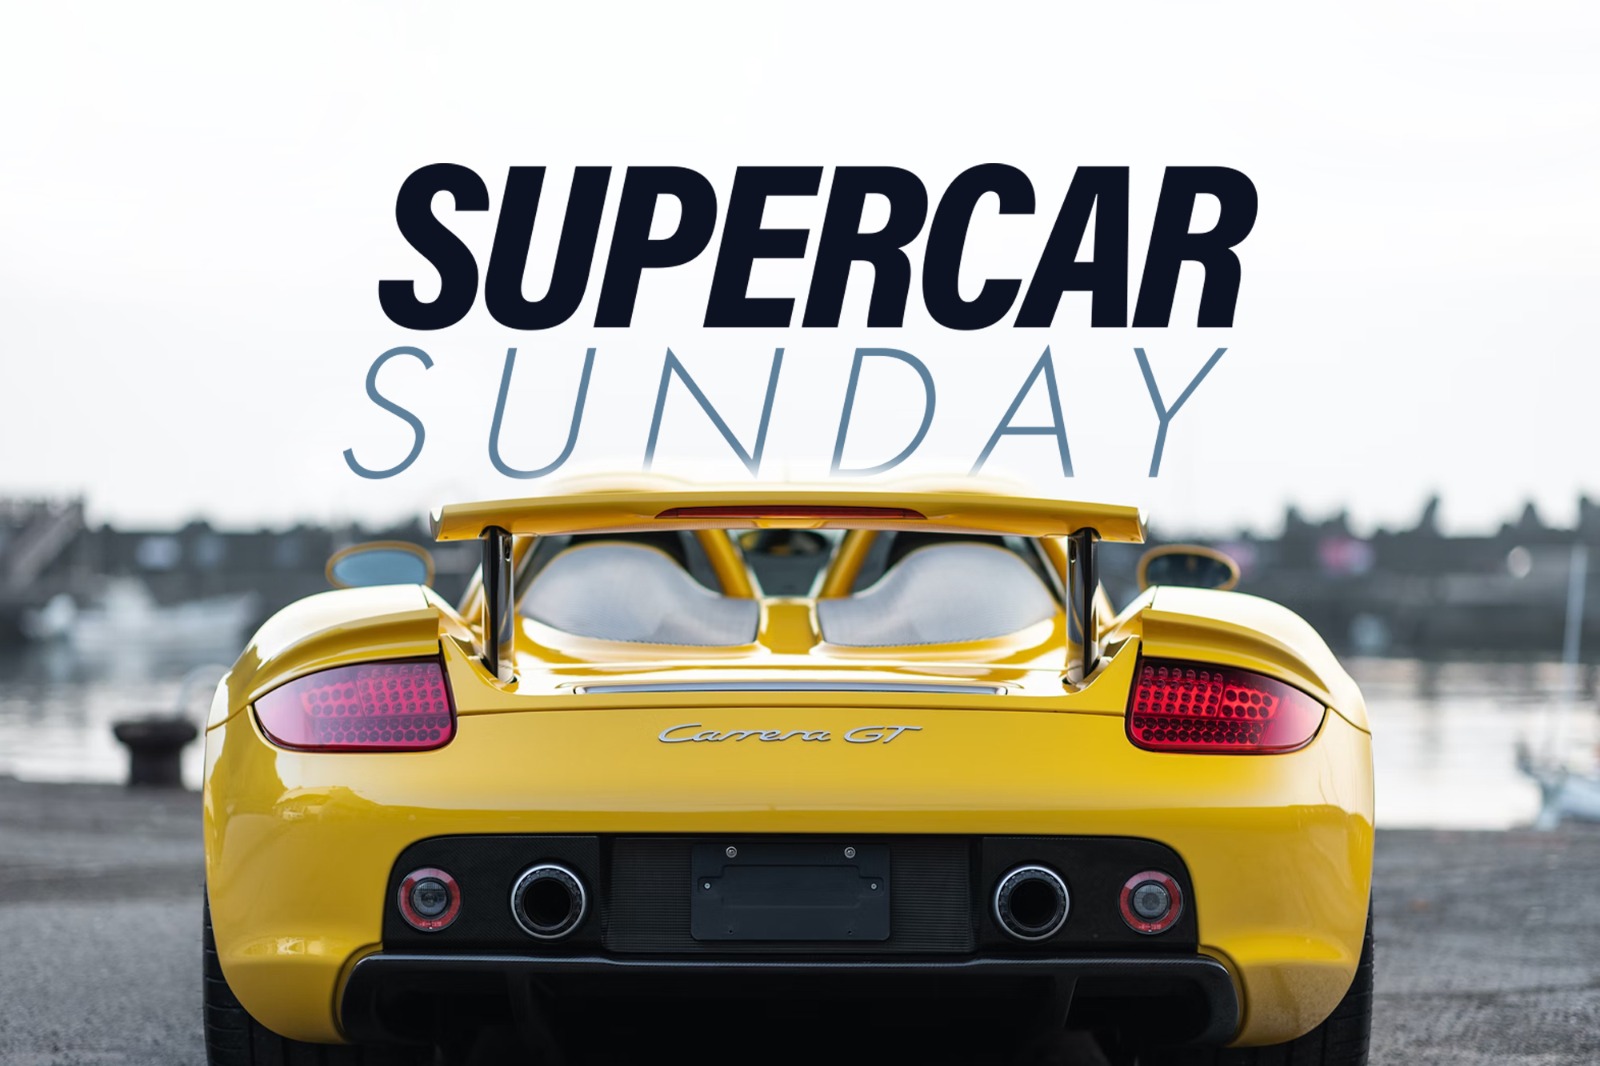 SUPERCAR SUNDAY RETURNS FOR A SECOND ROUND